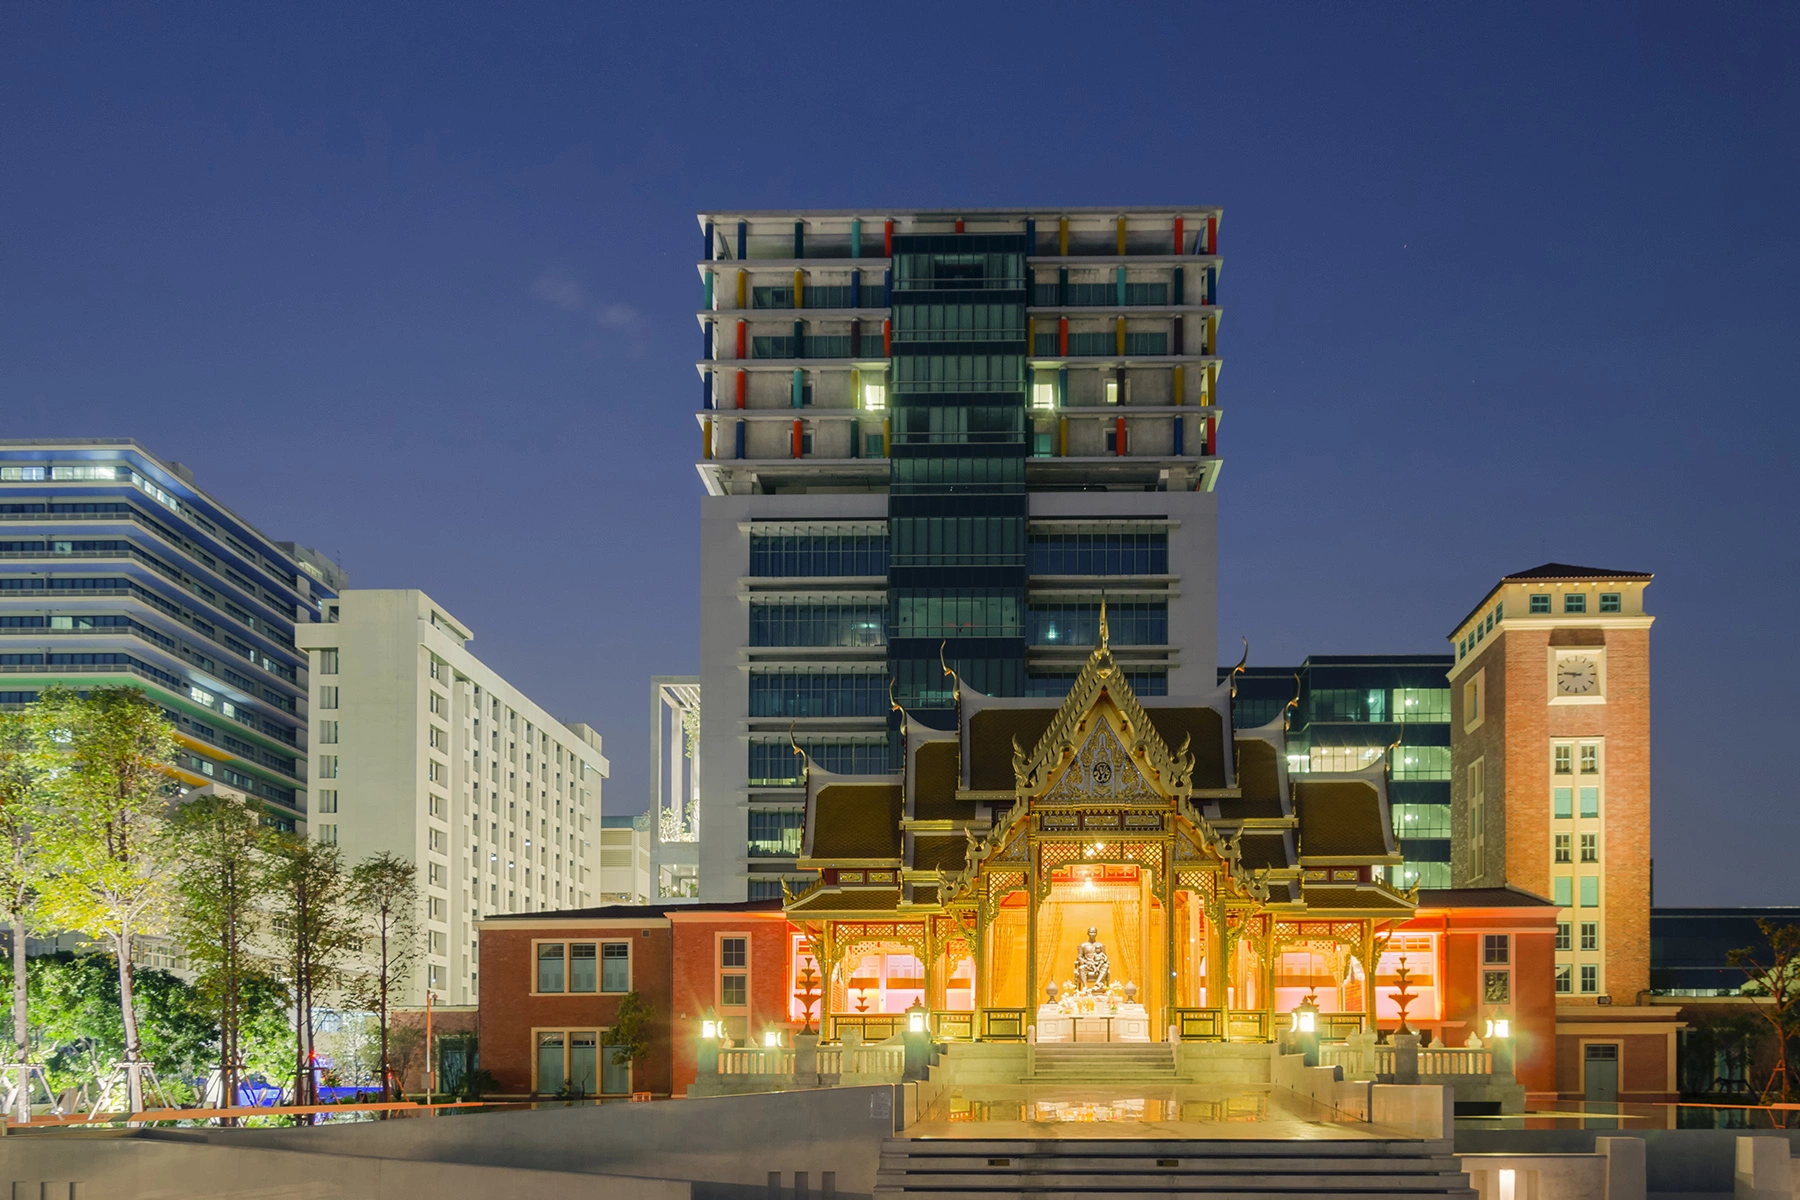 Exterior of the Siriraj Hospital is the oldest and largest hospital in Thailand

